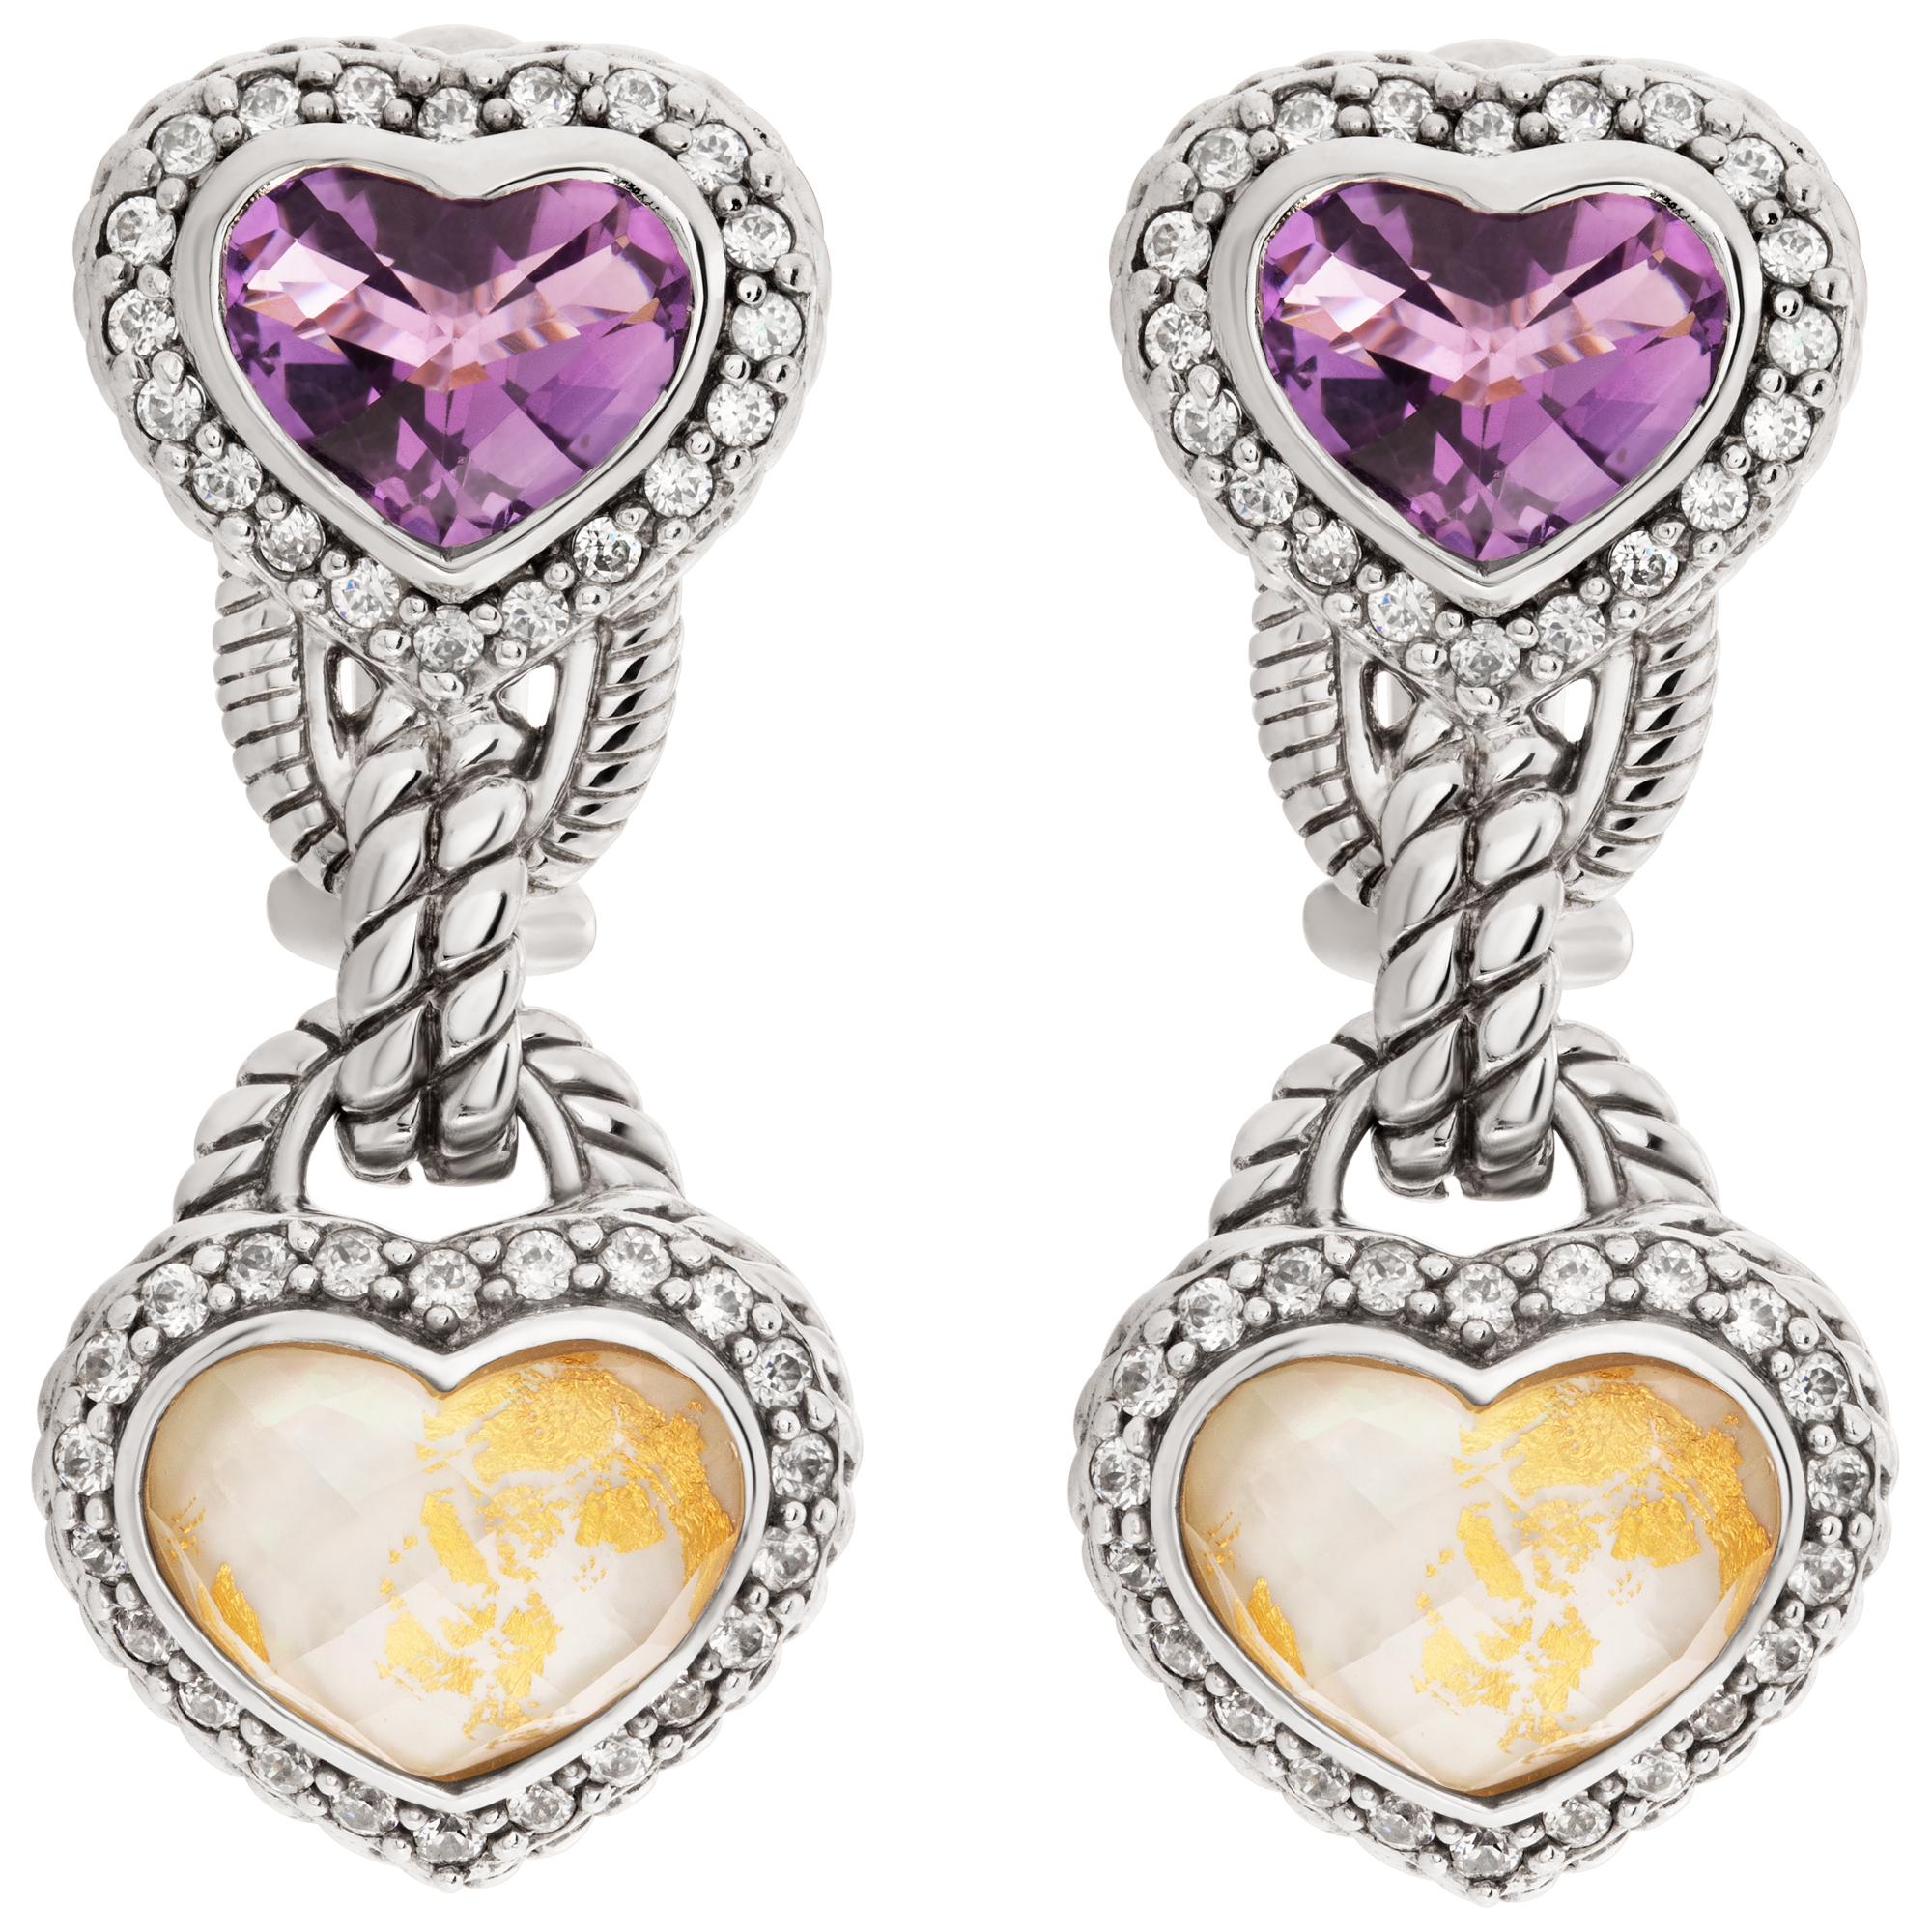 Judith Ripka earrings and ring set heart shaped amethyst and gold leaf doublet in sterling silver. Hanging length 33mm. Ring size 7